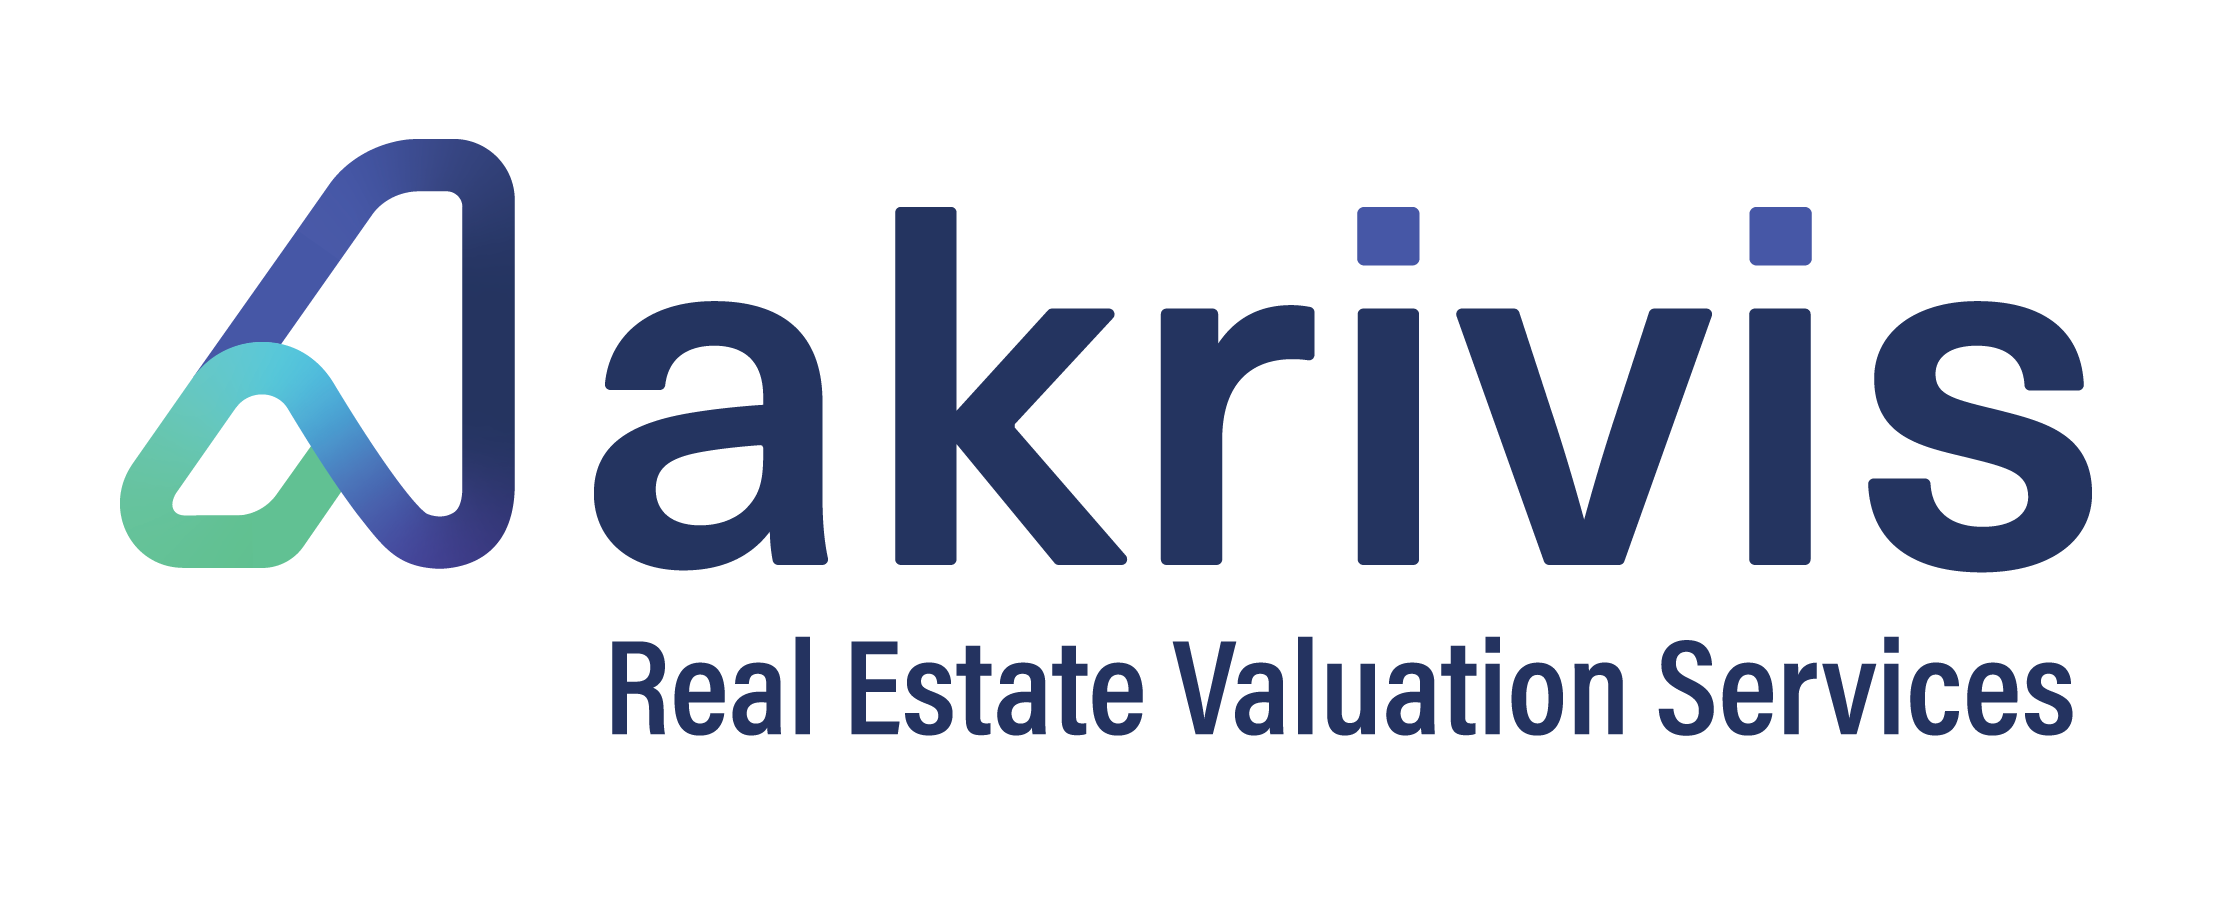 Akrivis Real Estate Valuation Solutions | American Bankers Association